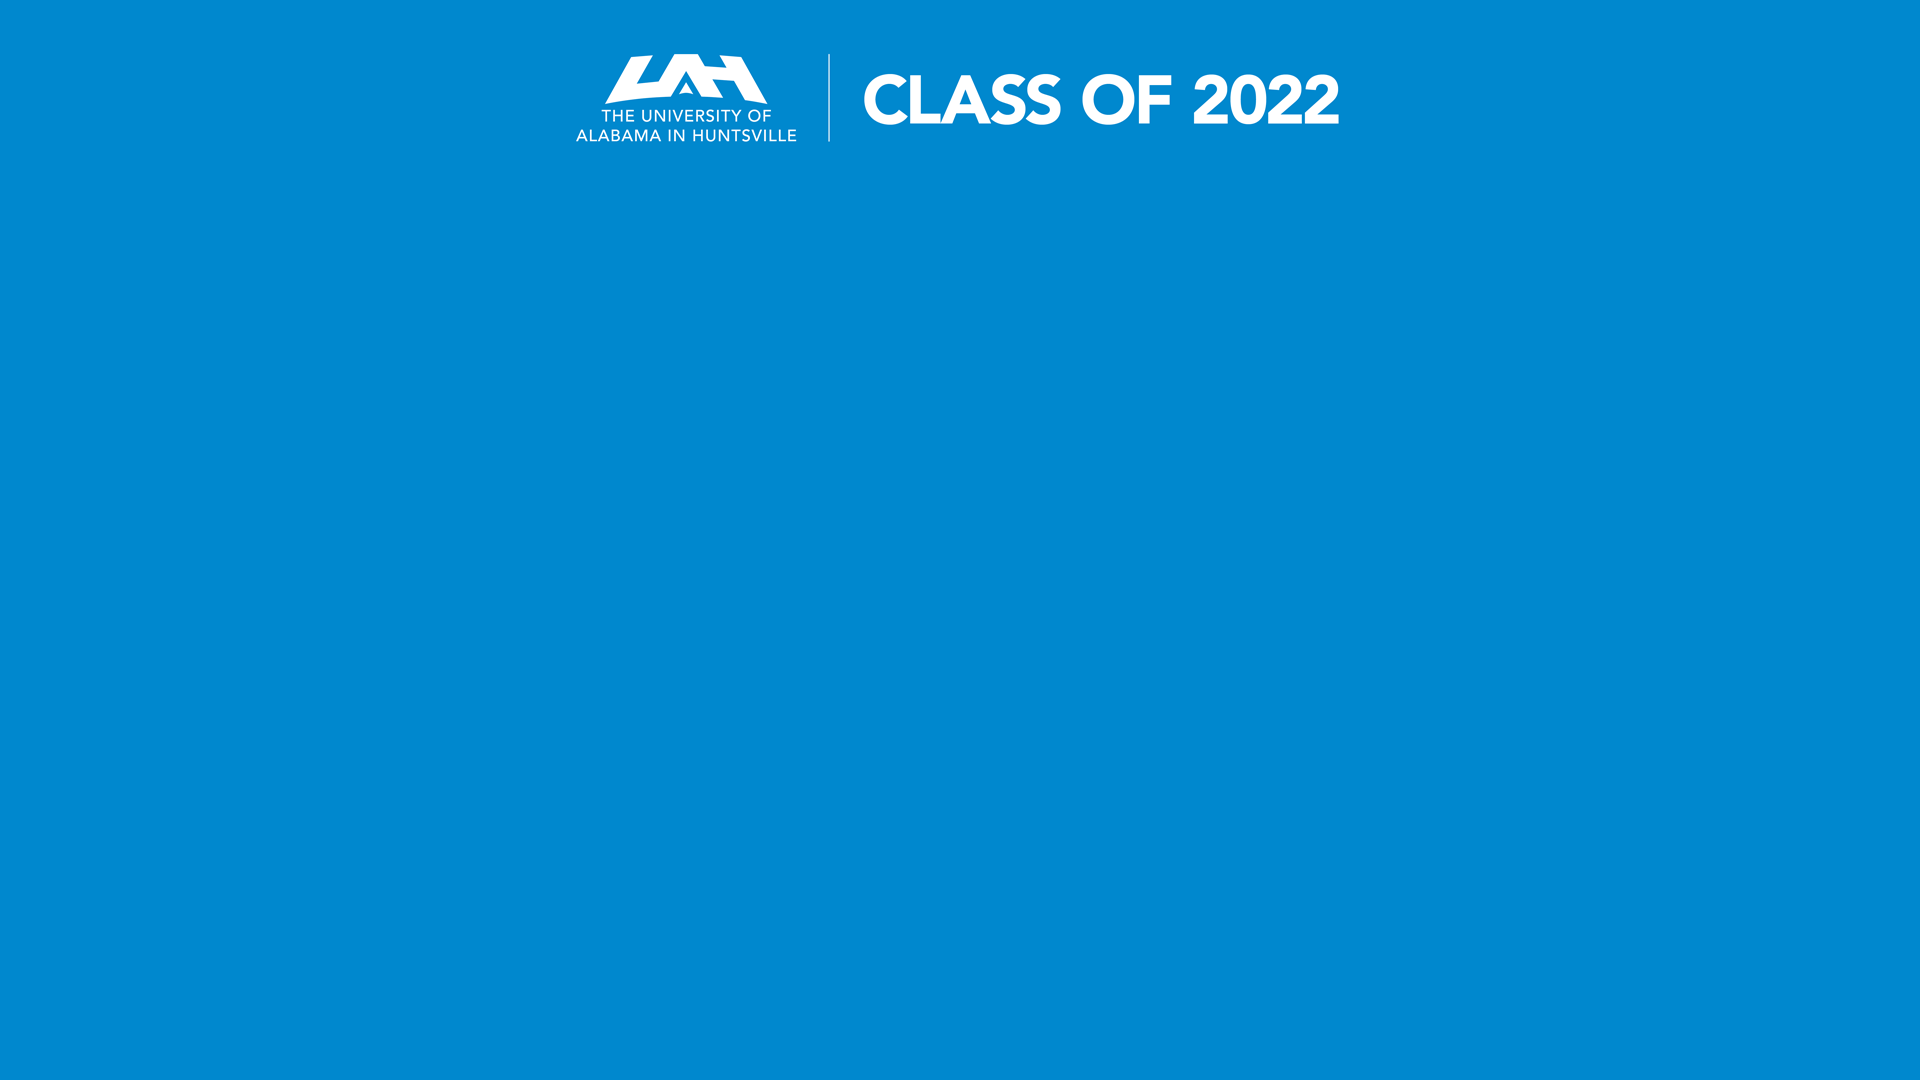 uah zoom plain blue background with logo and class of 2021 text